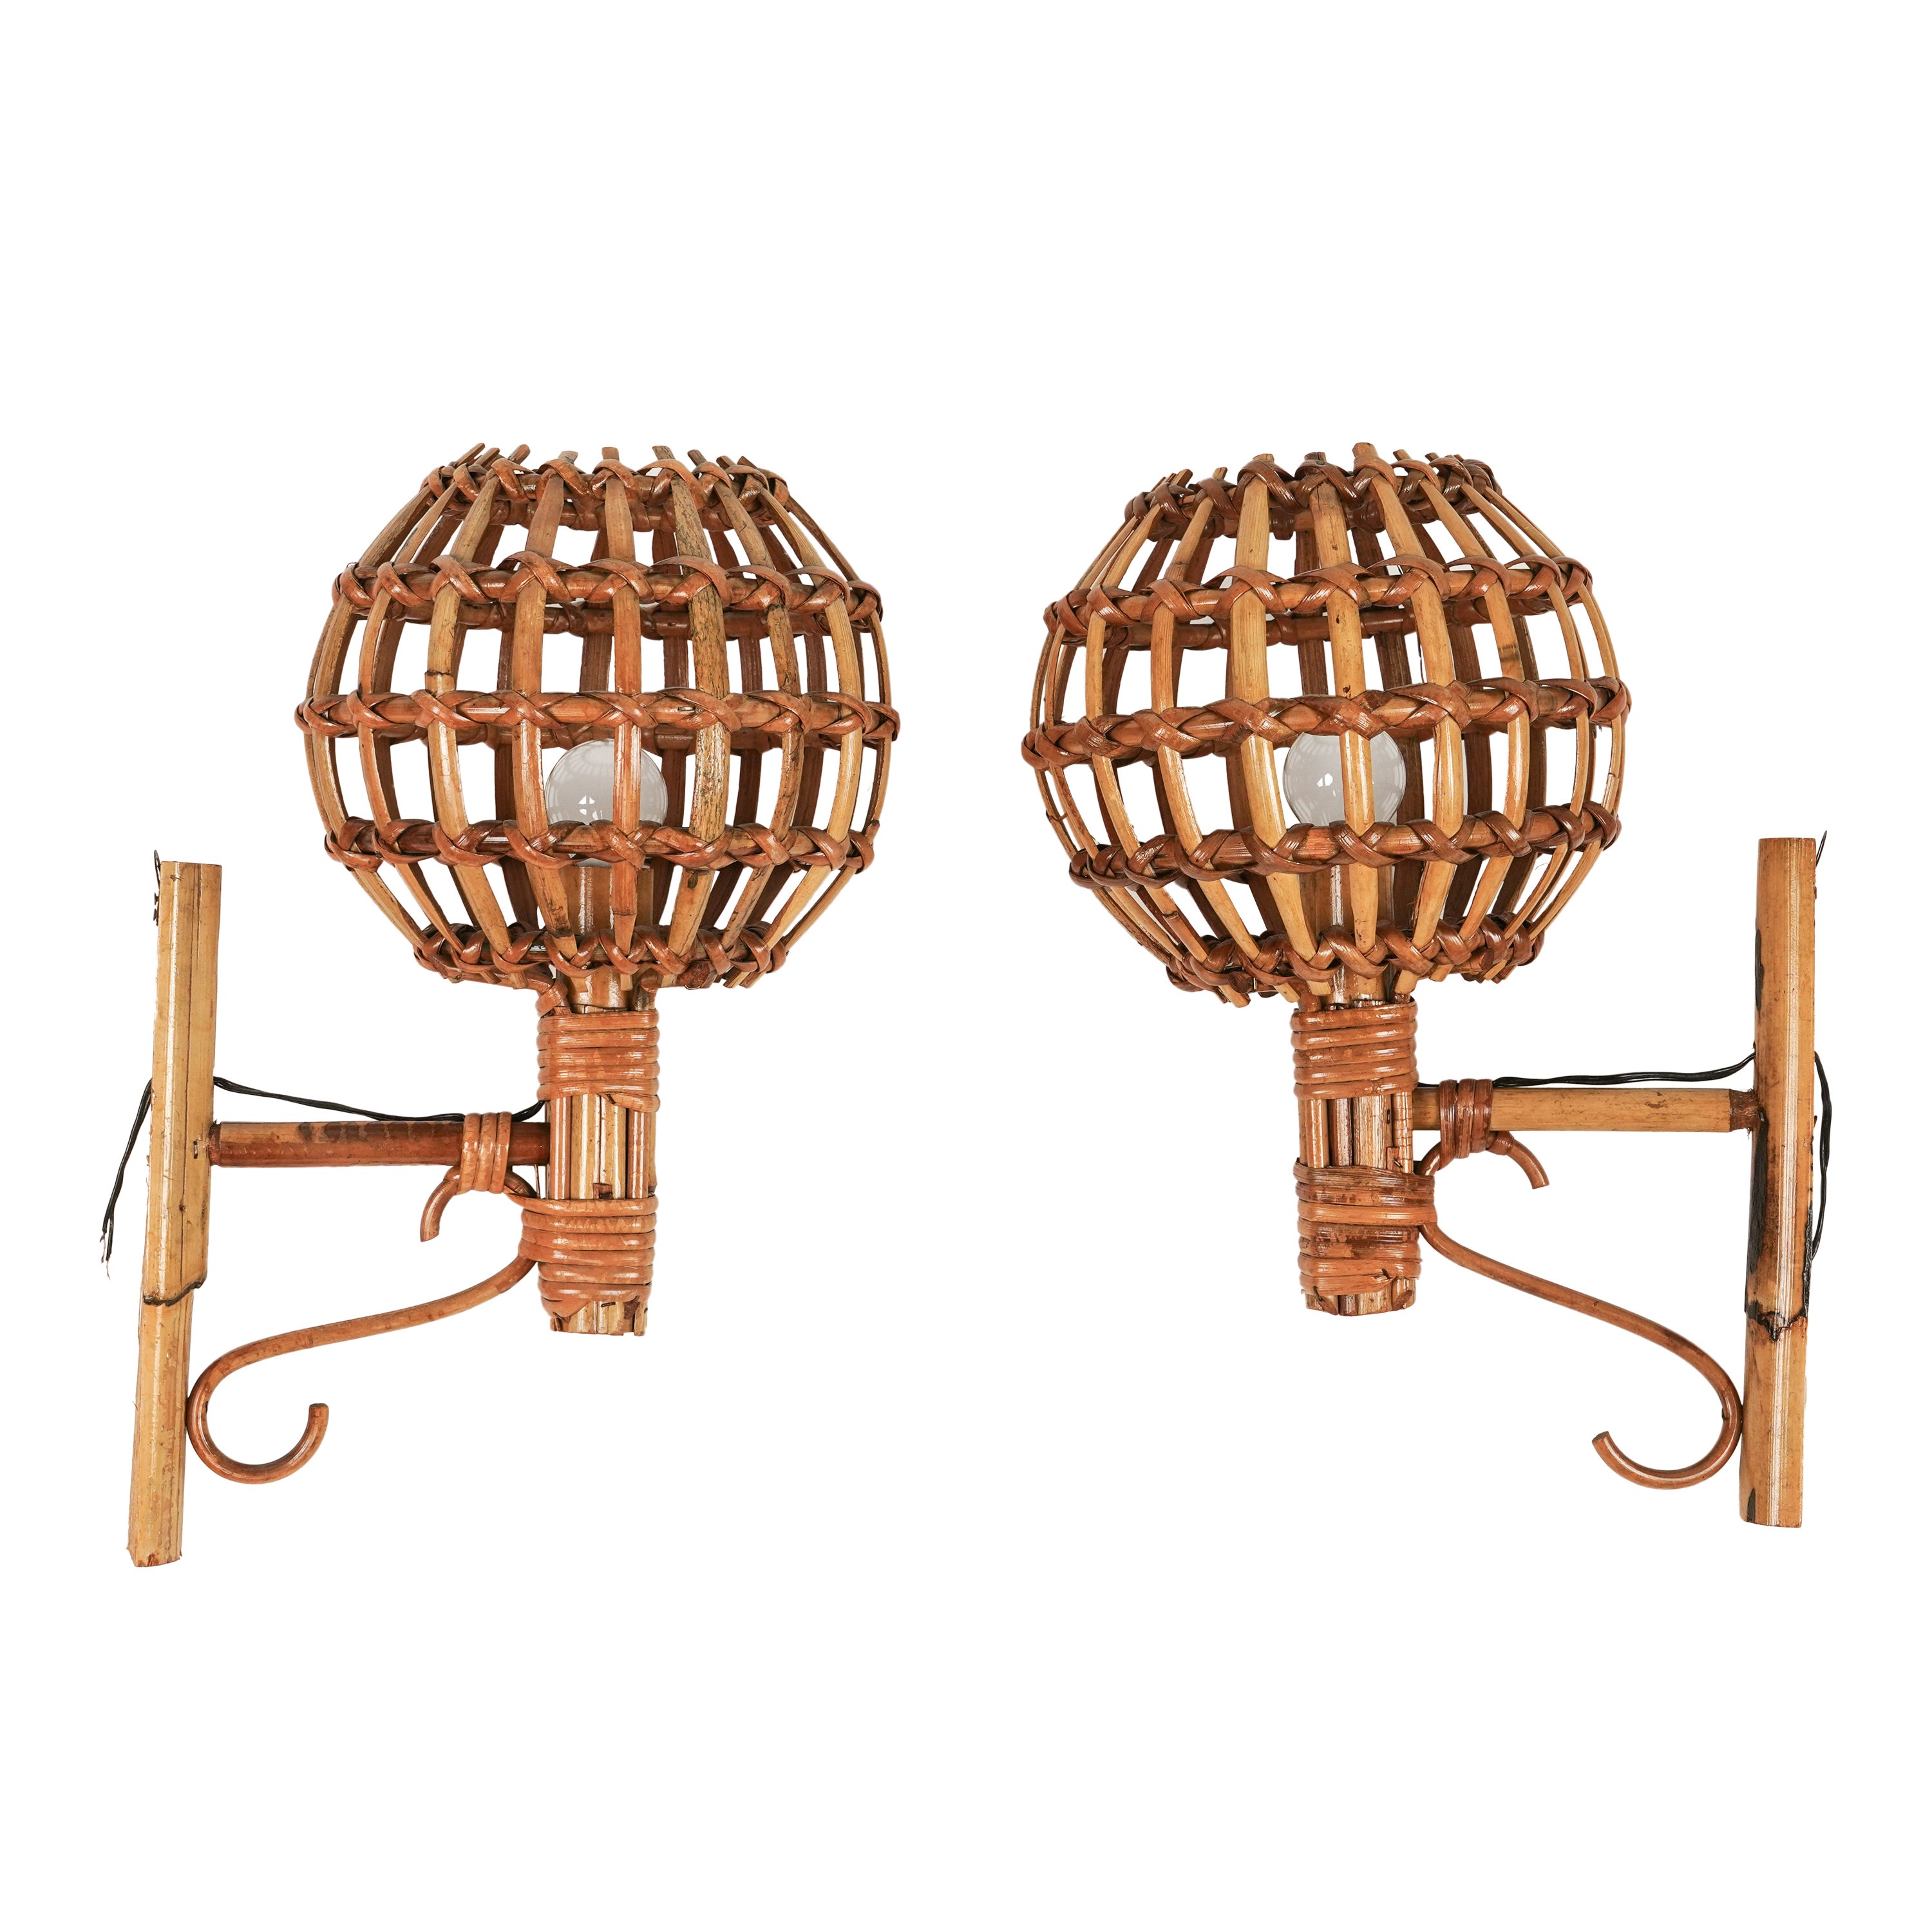 Pair of Sconces "Lantern" in Bamboo and Rattan Louis Sognot Style, Italy, 1960s For Sale